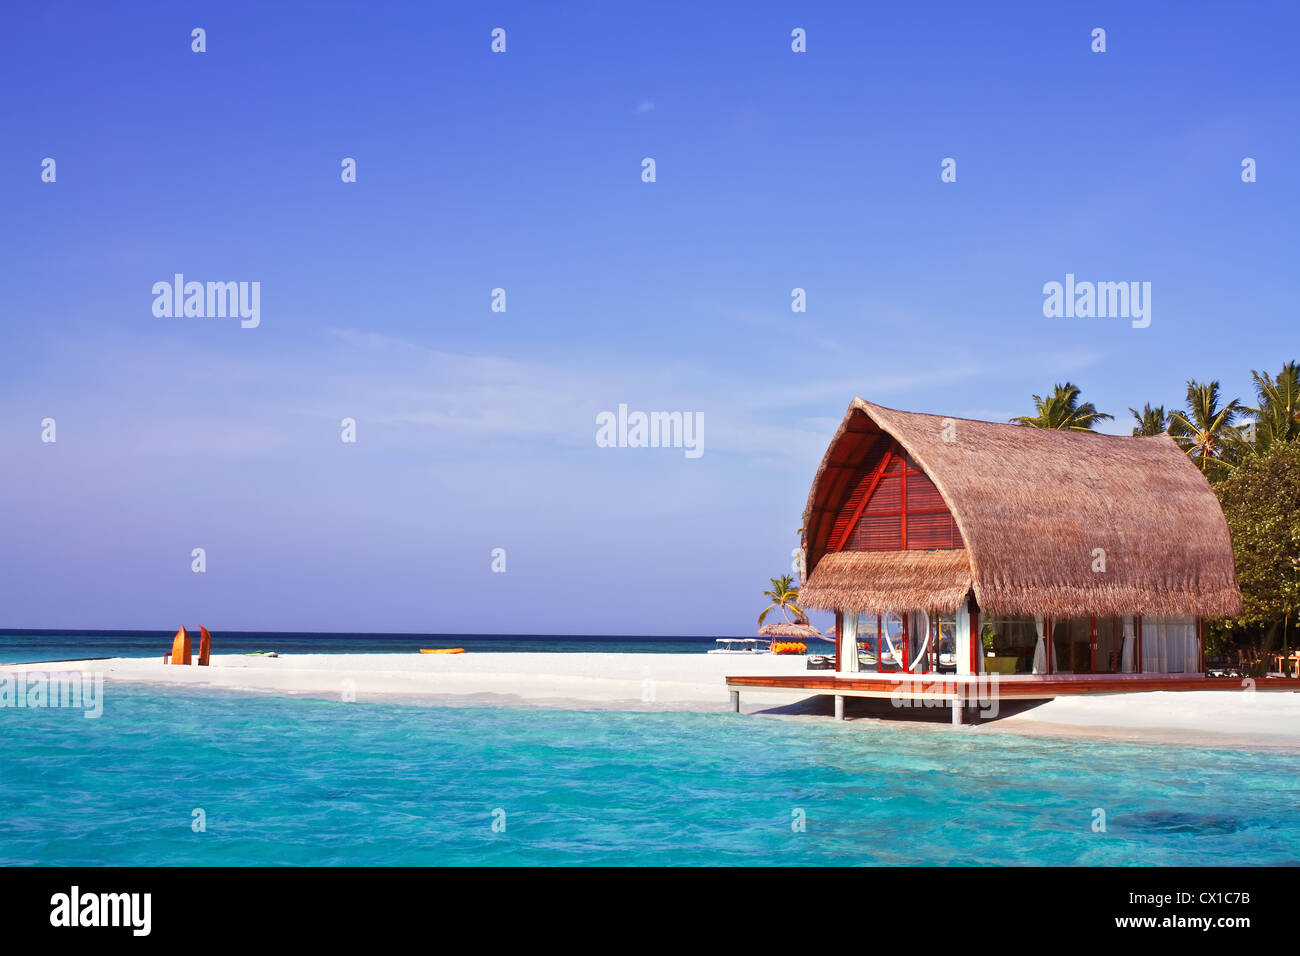 Landscape photo of beach house in Maldive ocean with blue sky Stock Photo